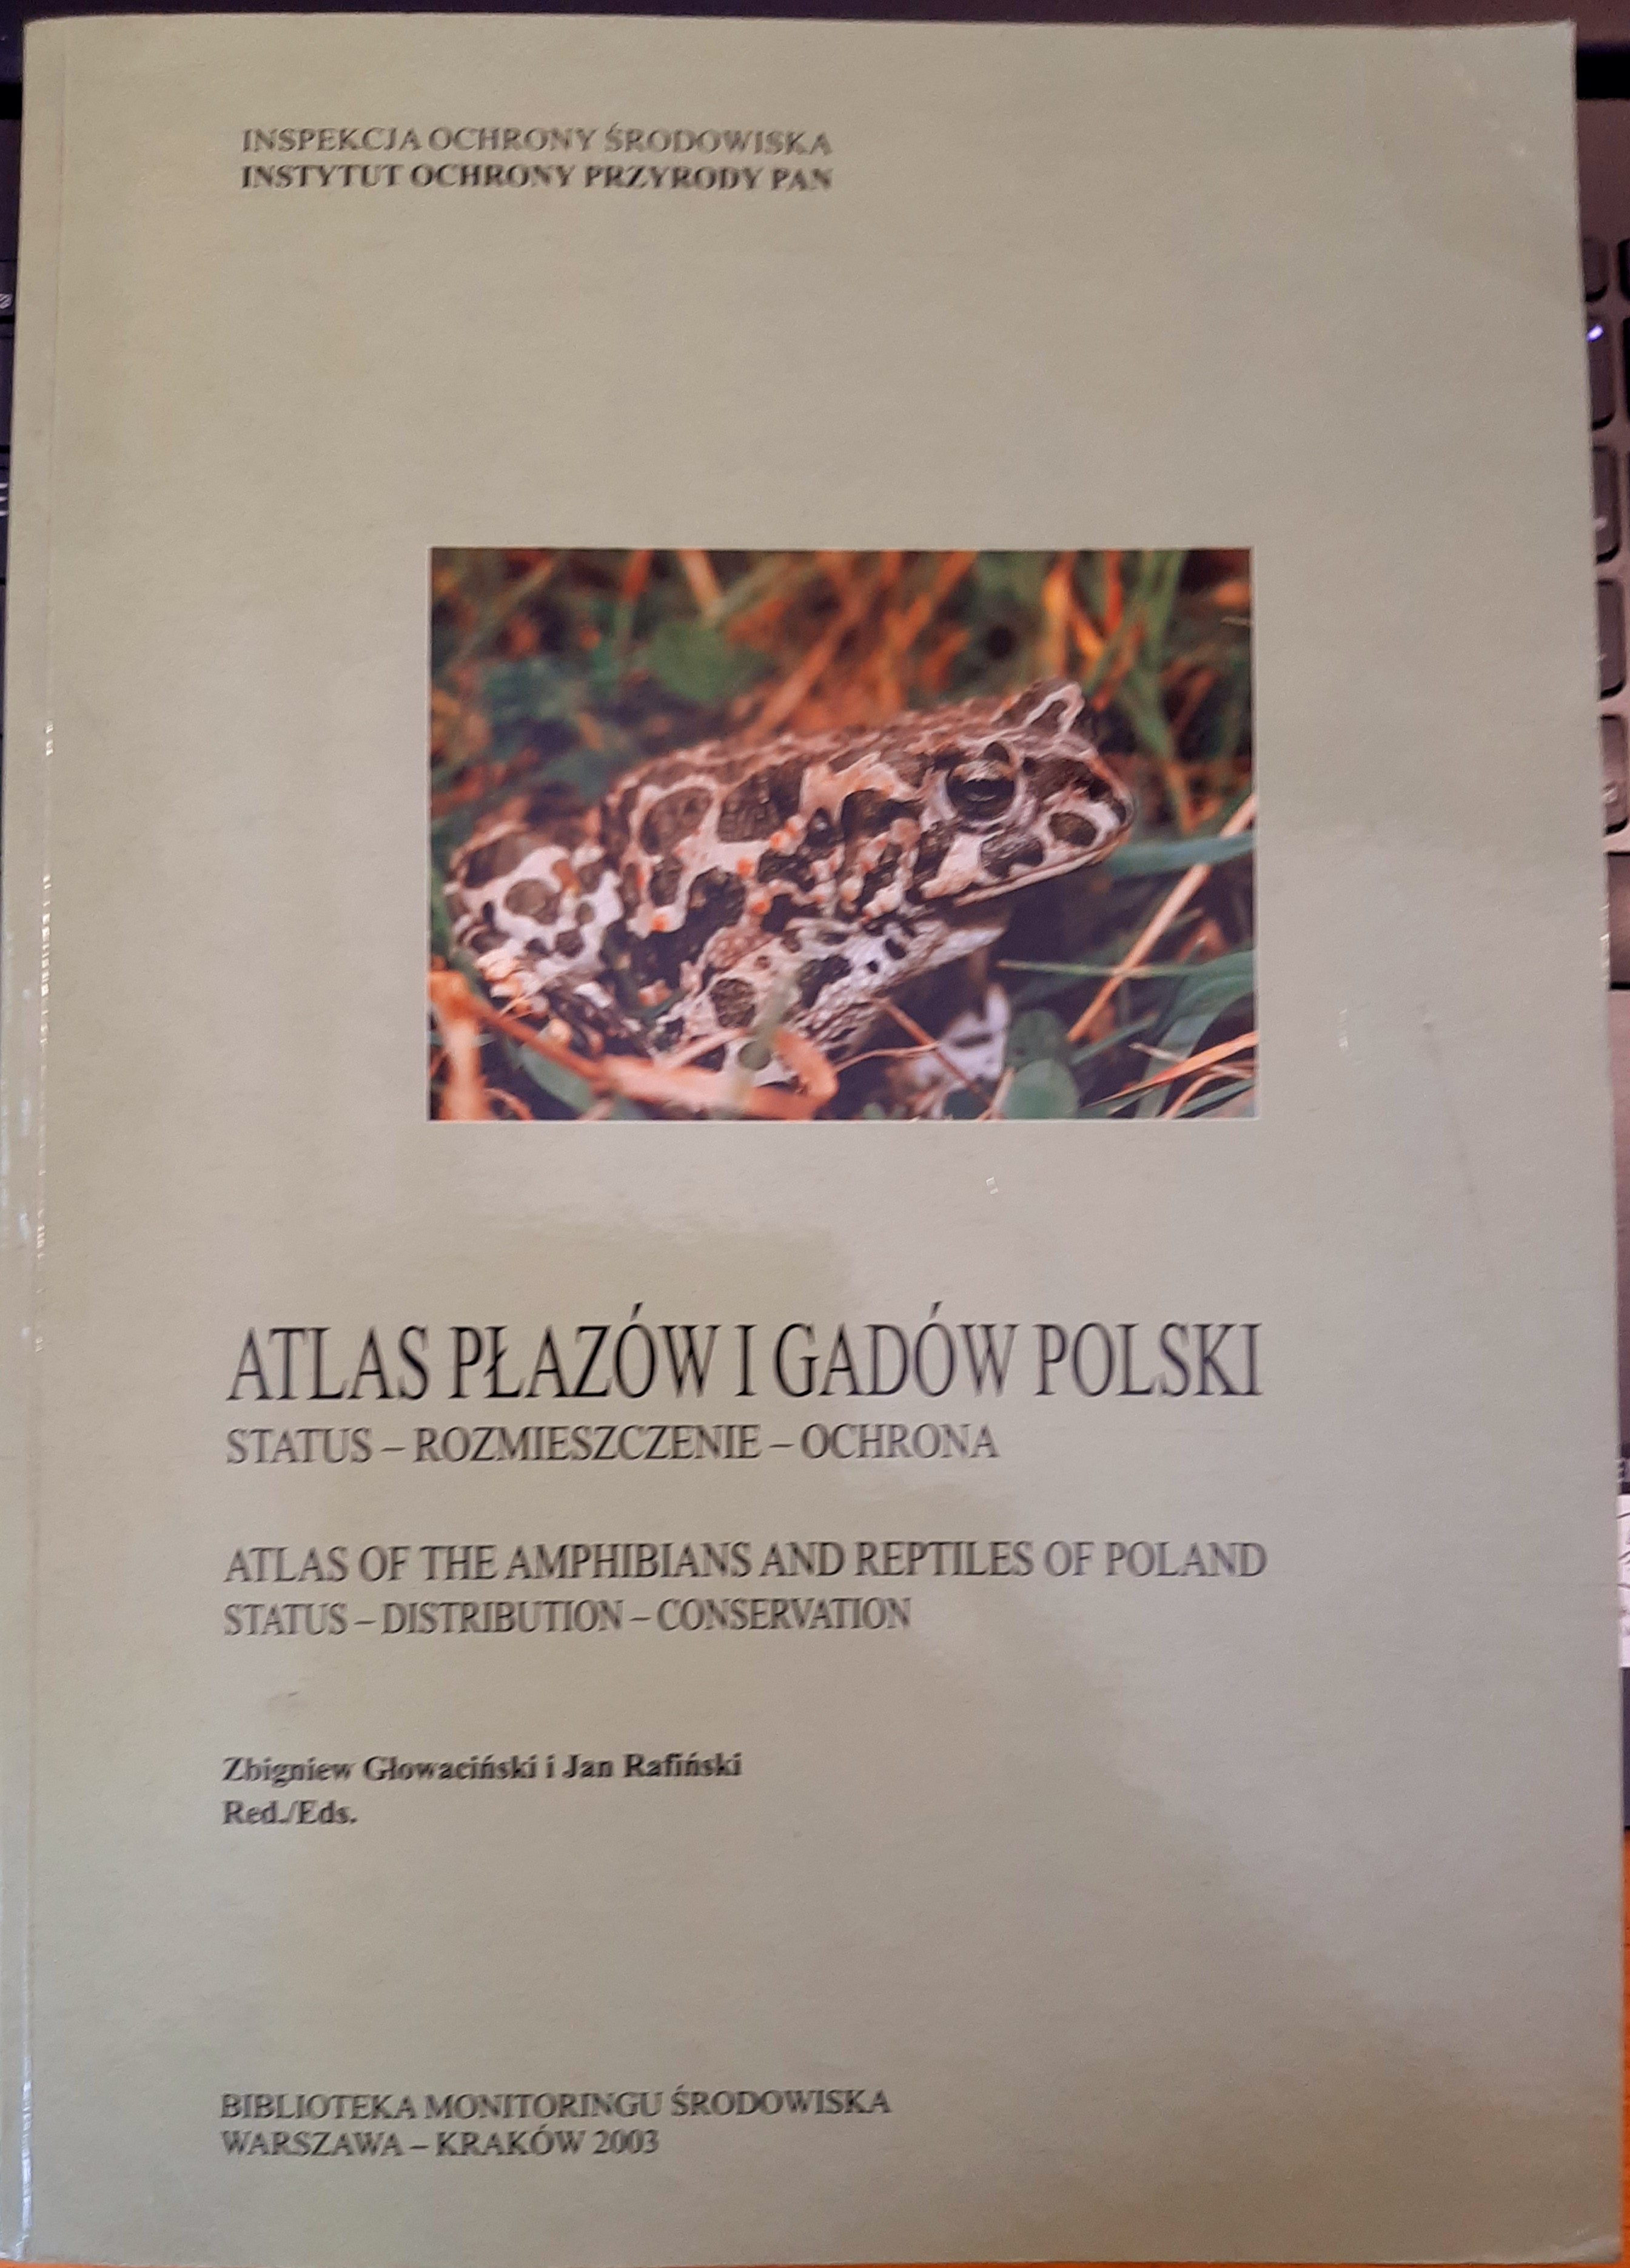 Atlas of the Amphibians and Reptiles of Poland: status, distribution, conservation (Rippl-Rónai Múzeum CC BY-NC-ND)